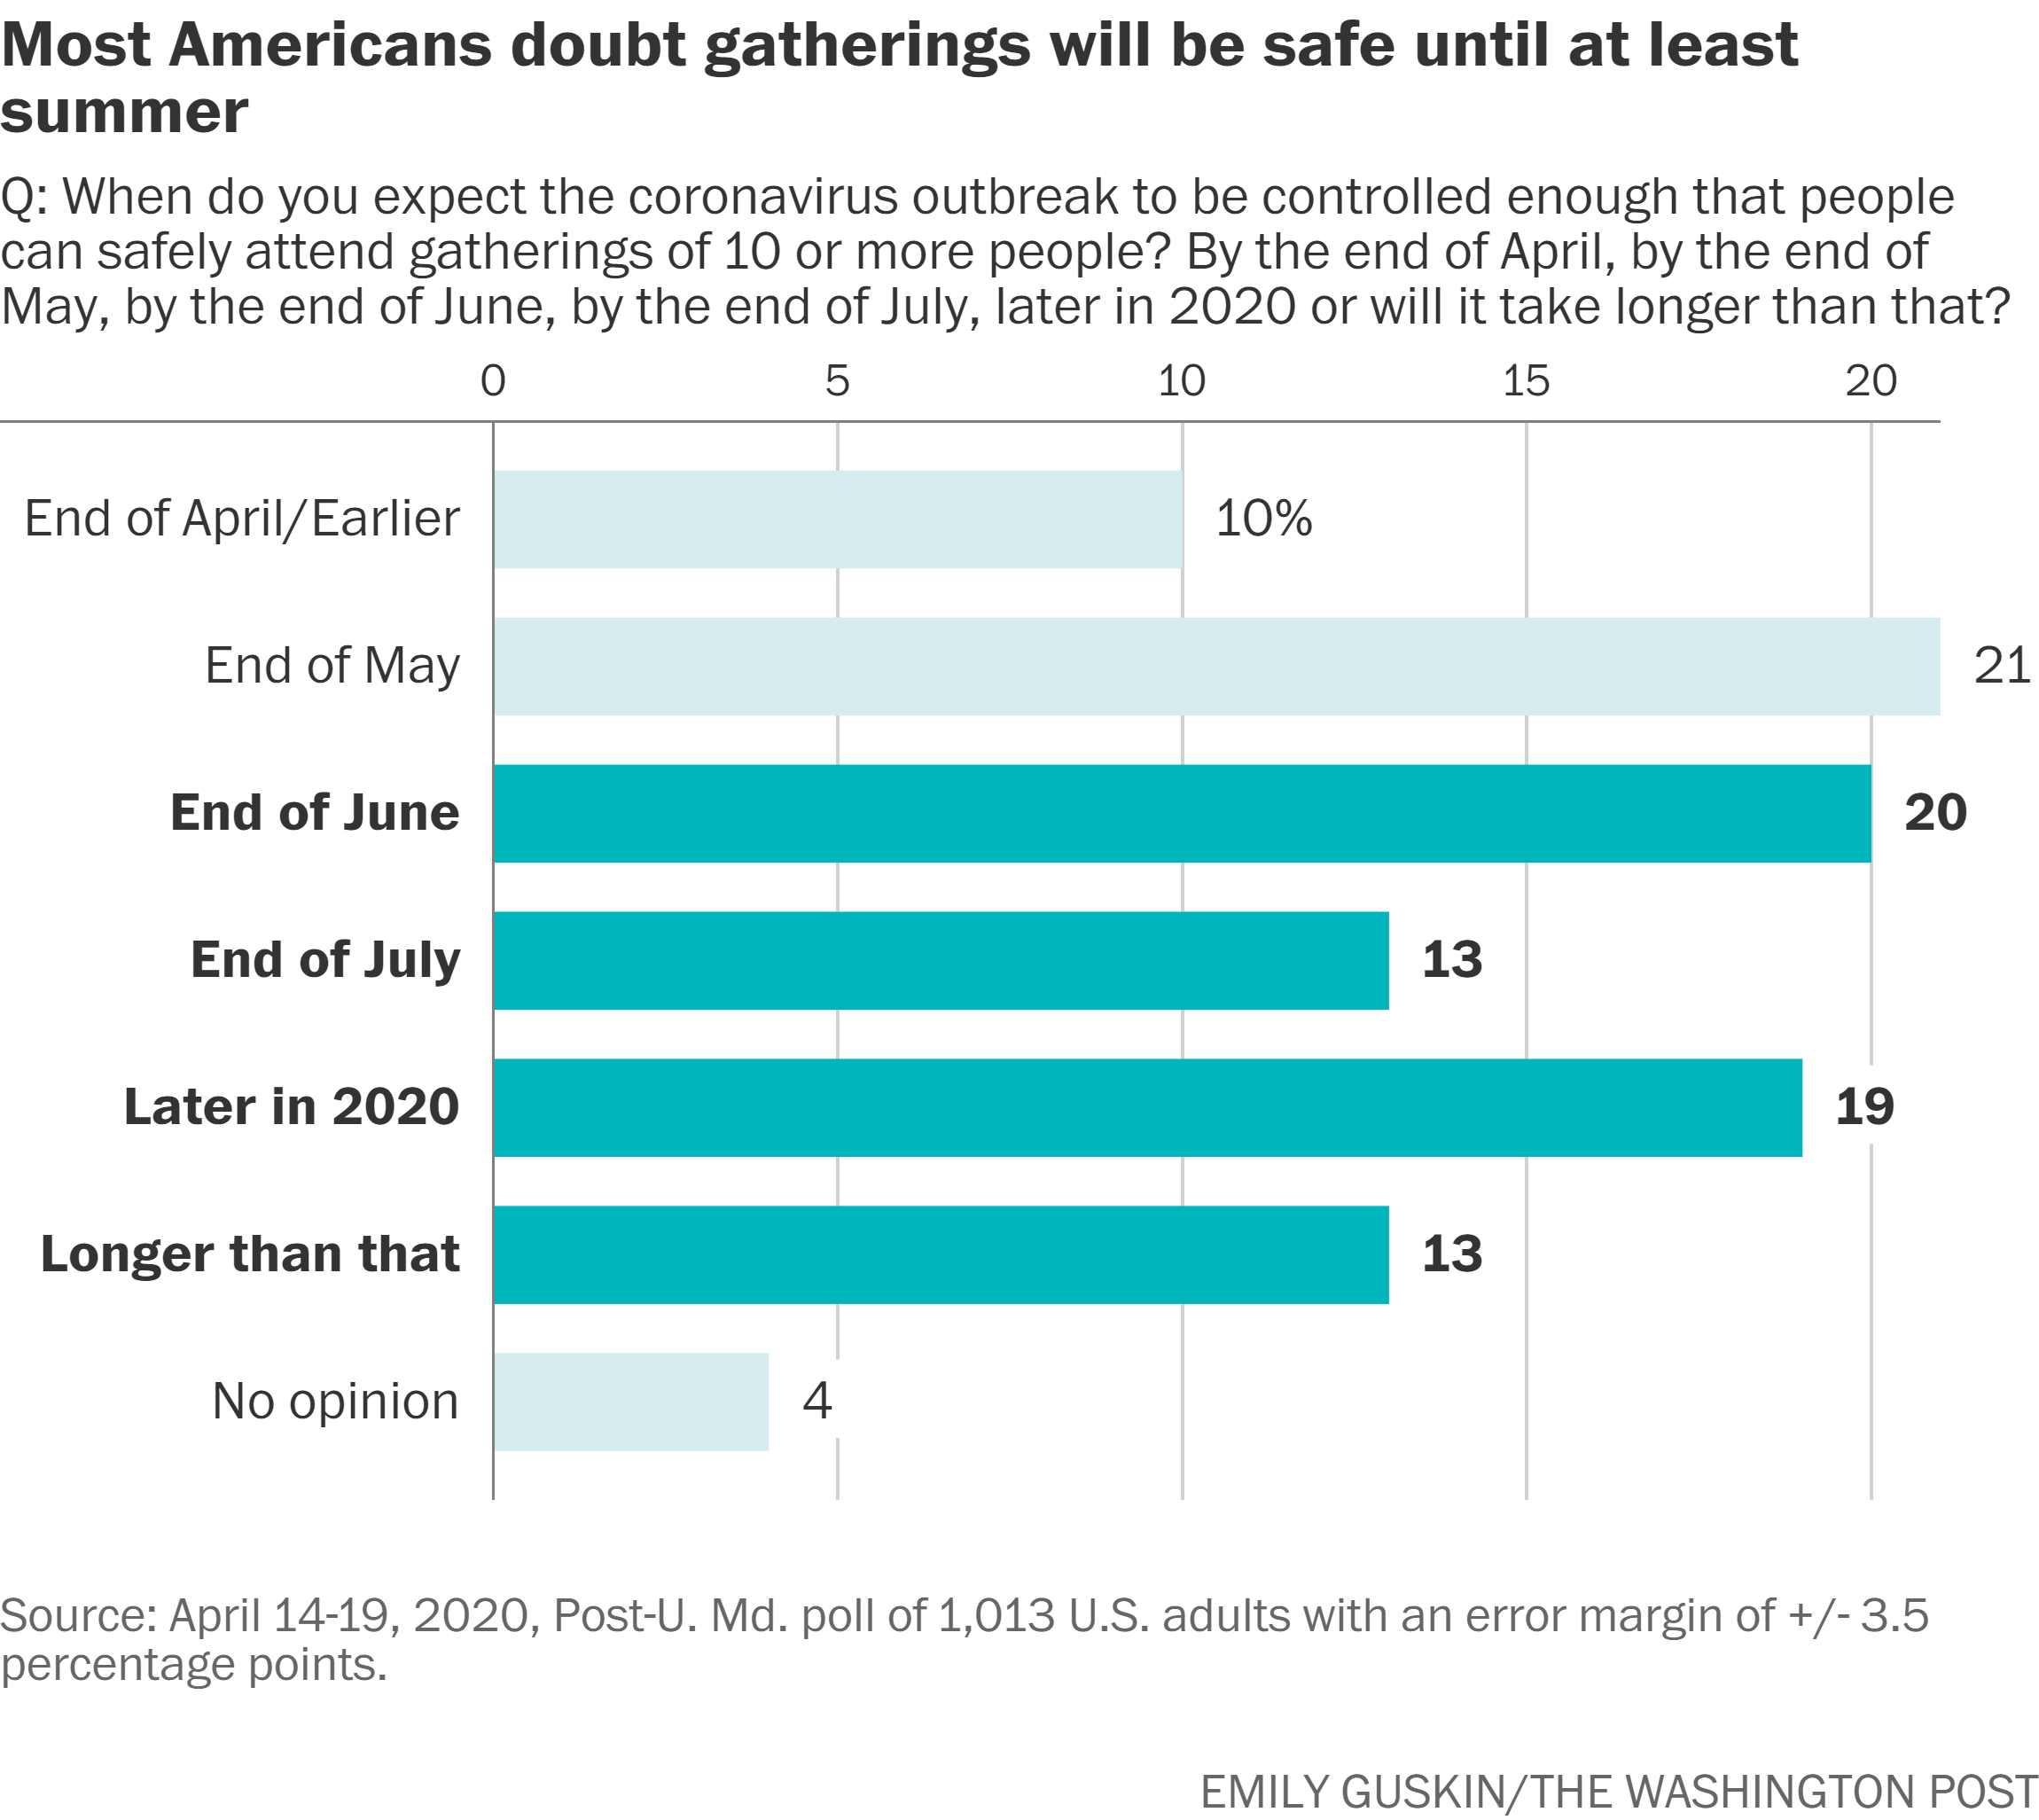 Graph: Most Americans doubt gatherings will be safe until at least next summer. Q: When do you expect the coronavirus outbreak to be controlled enough that people can safely attend gatherings of 10 or more people? By the end of April, by the end of May, by the end of June, by the end of July, later in 2020 or will it take longer than that? End of April/earlier: 10%. End of May: 21%. End of June: 20%. End of July: 13%. Later in 2020: 19%. Longer than that: 13%. No opinion: 4%